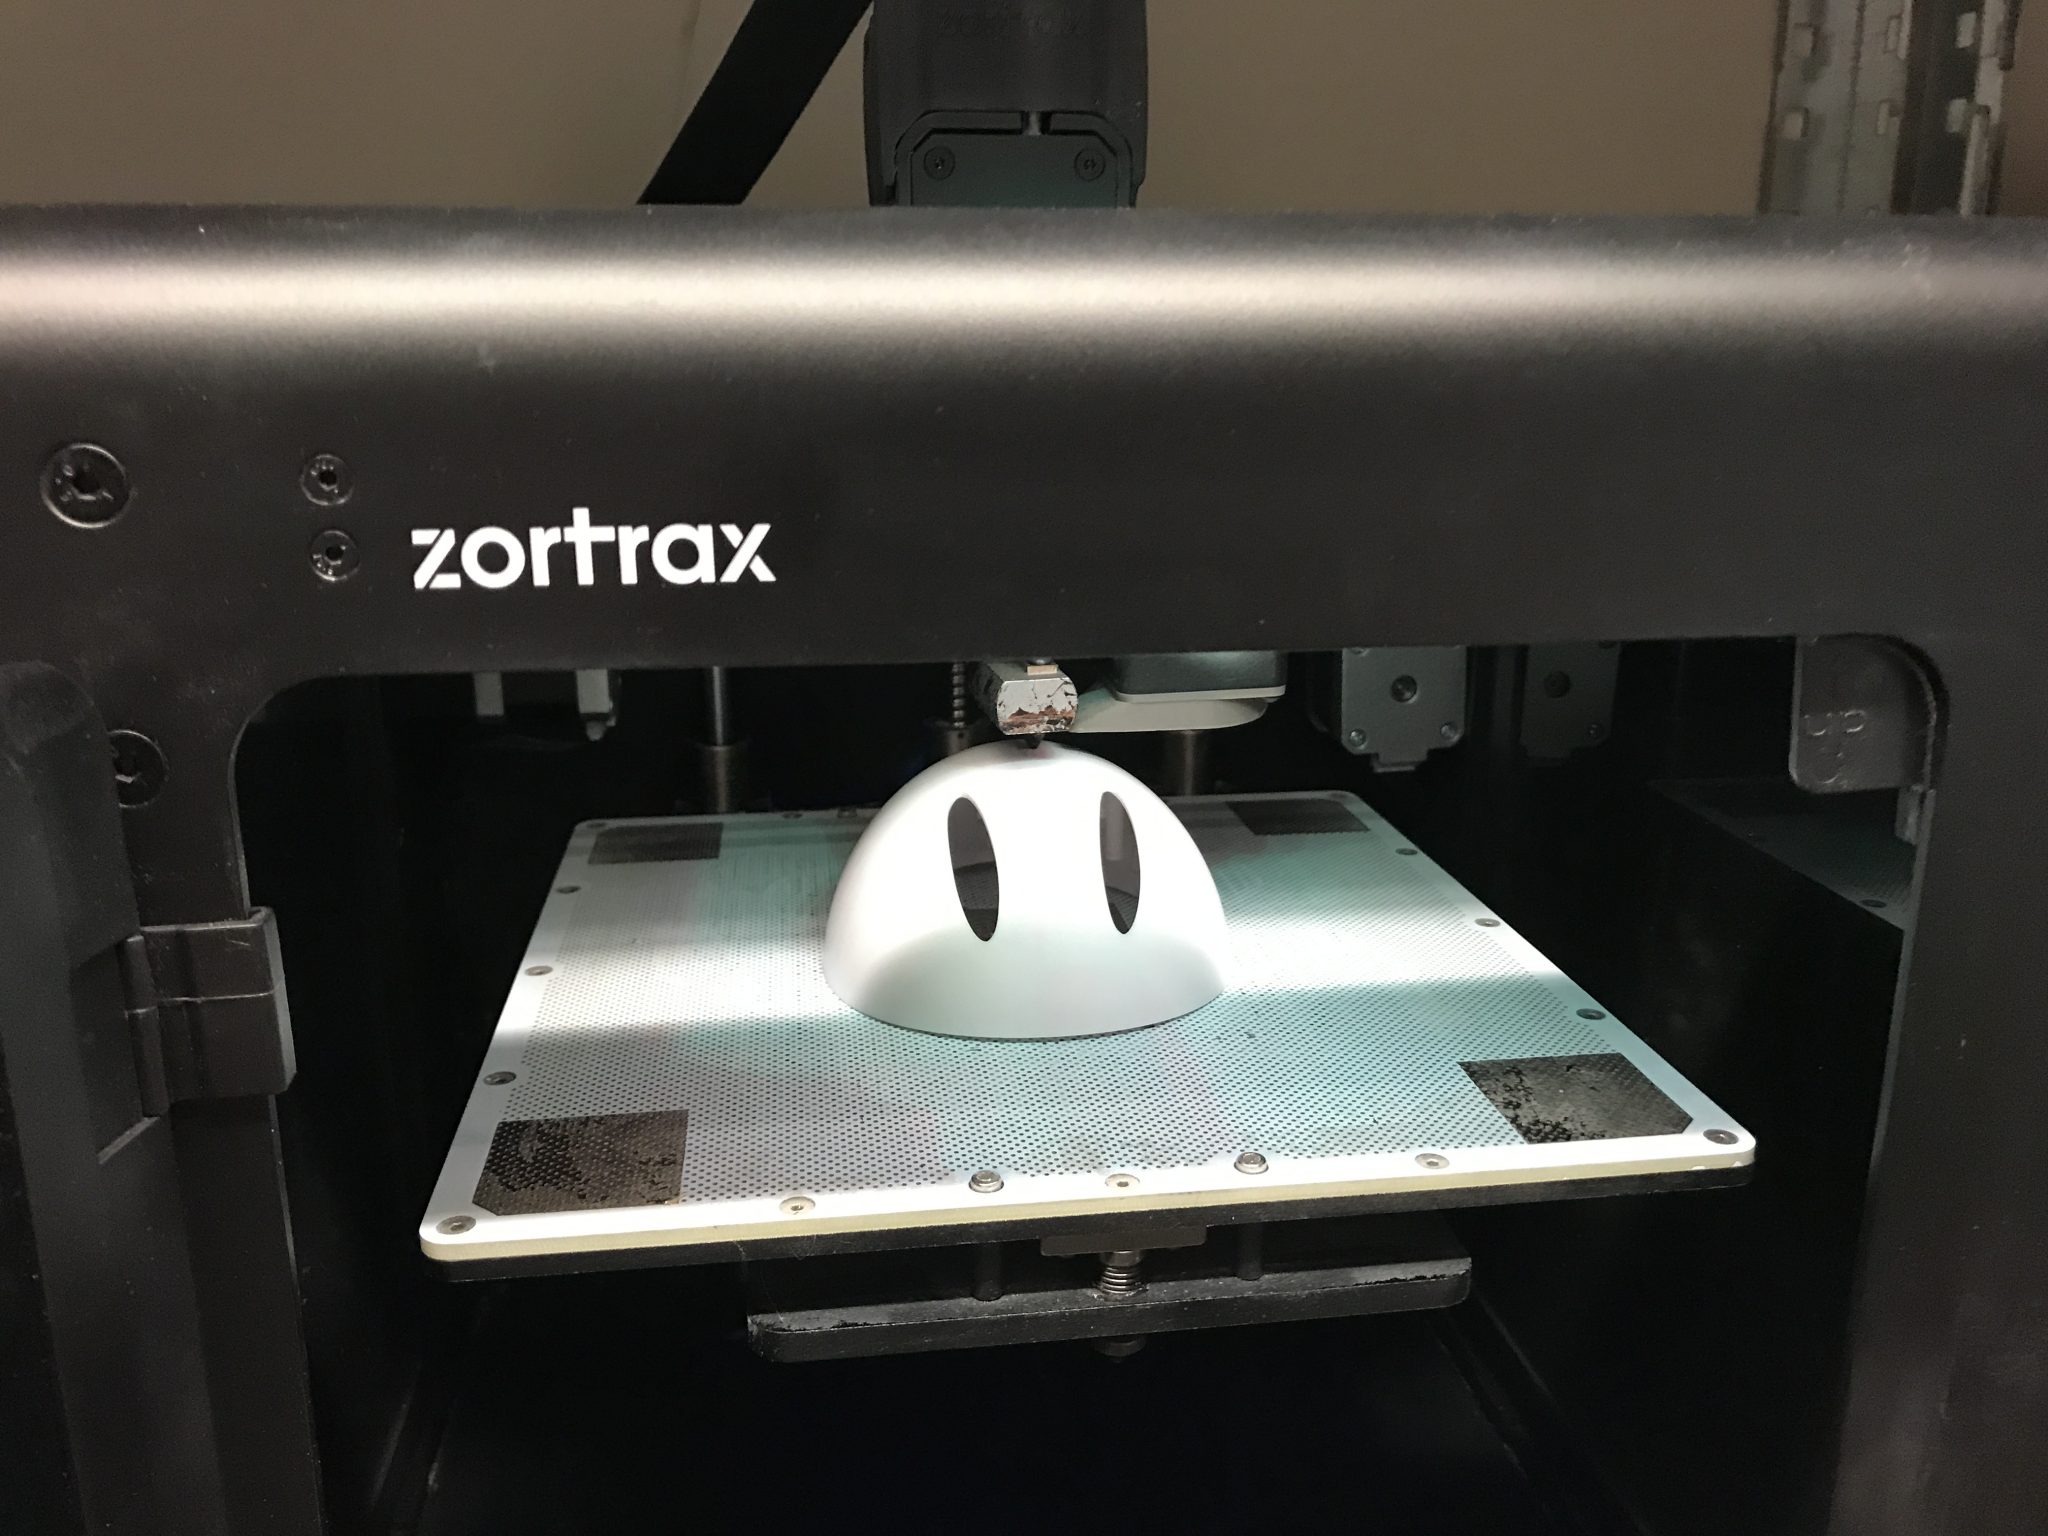 The head of the Photon robot printing on a Zortrax M200. Photo via Zortrax.